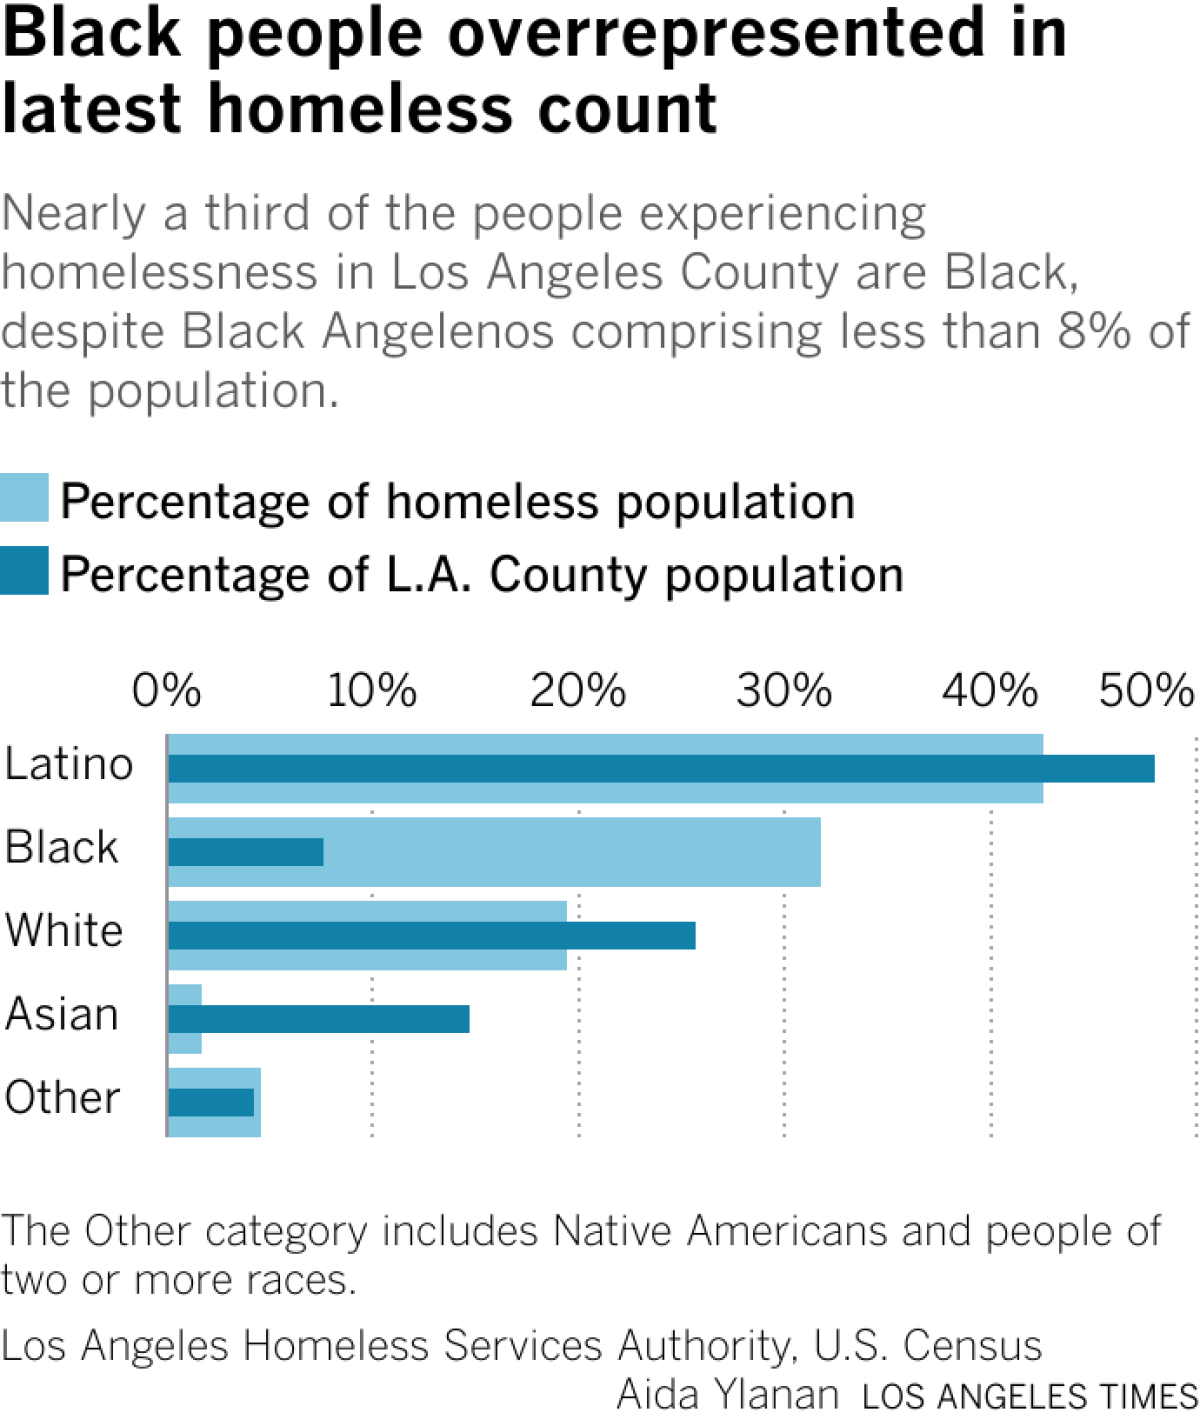 Nearly a third of the people experiencing homelessness in Los Angeles County are Black, despite Black Angelenos comprising less than 8% of the population.